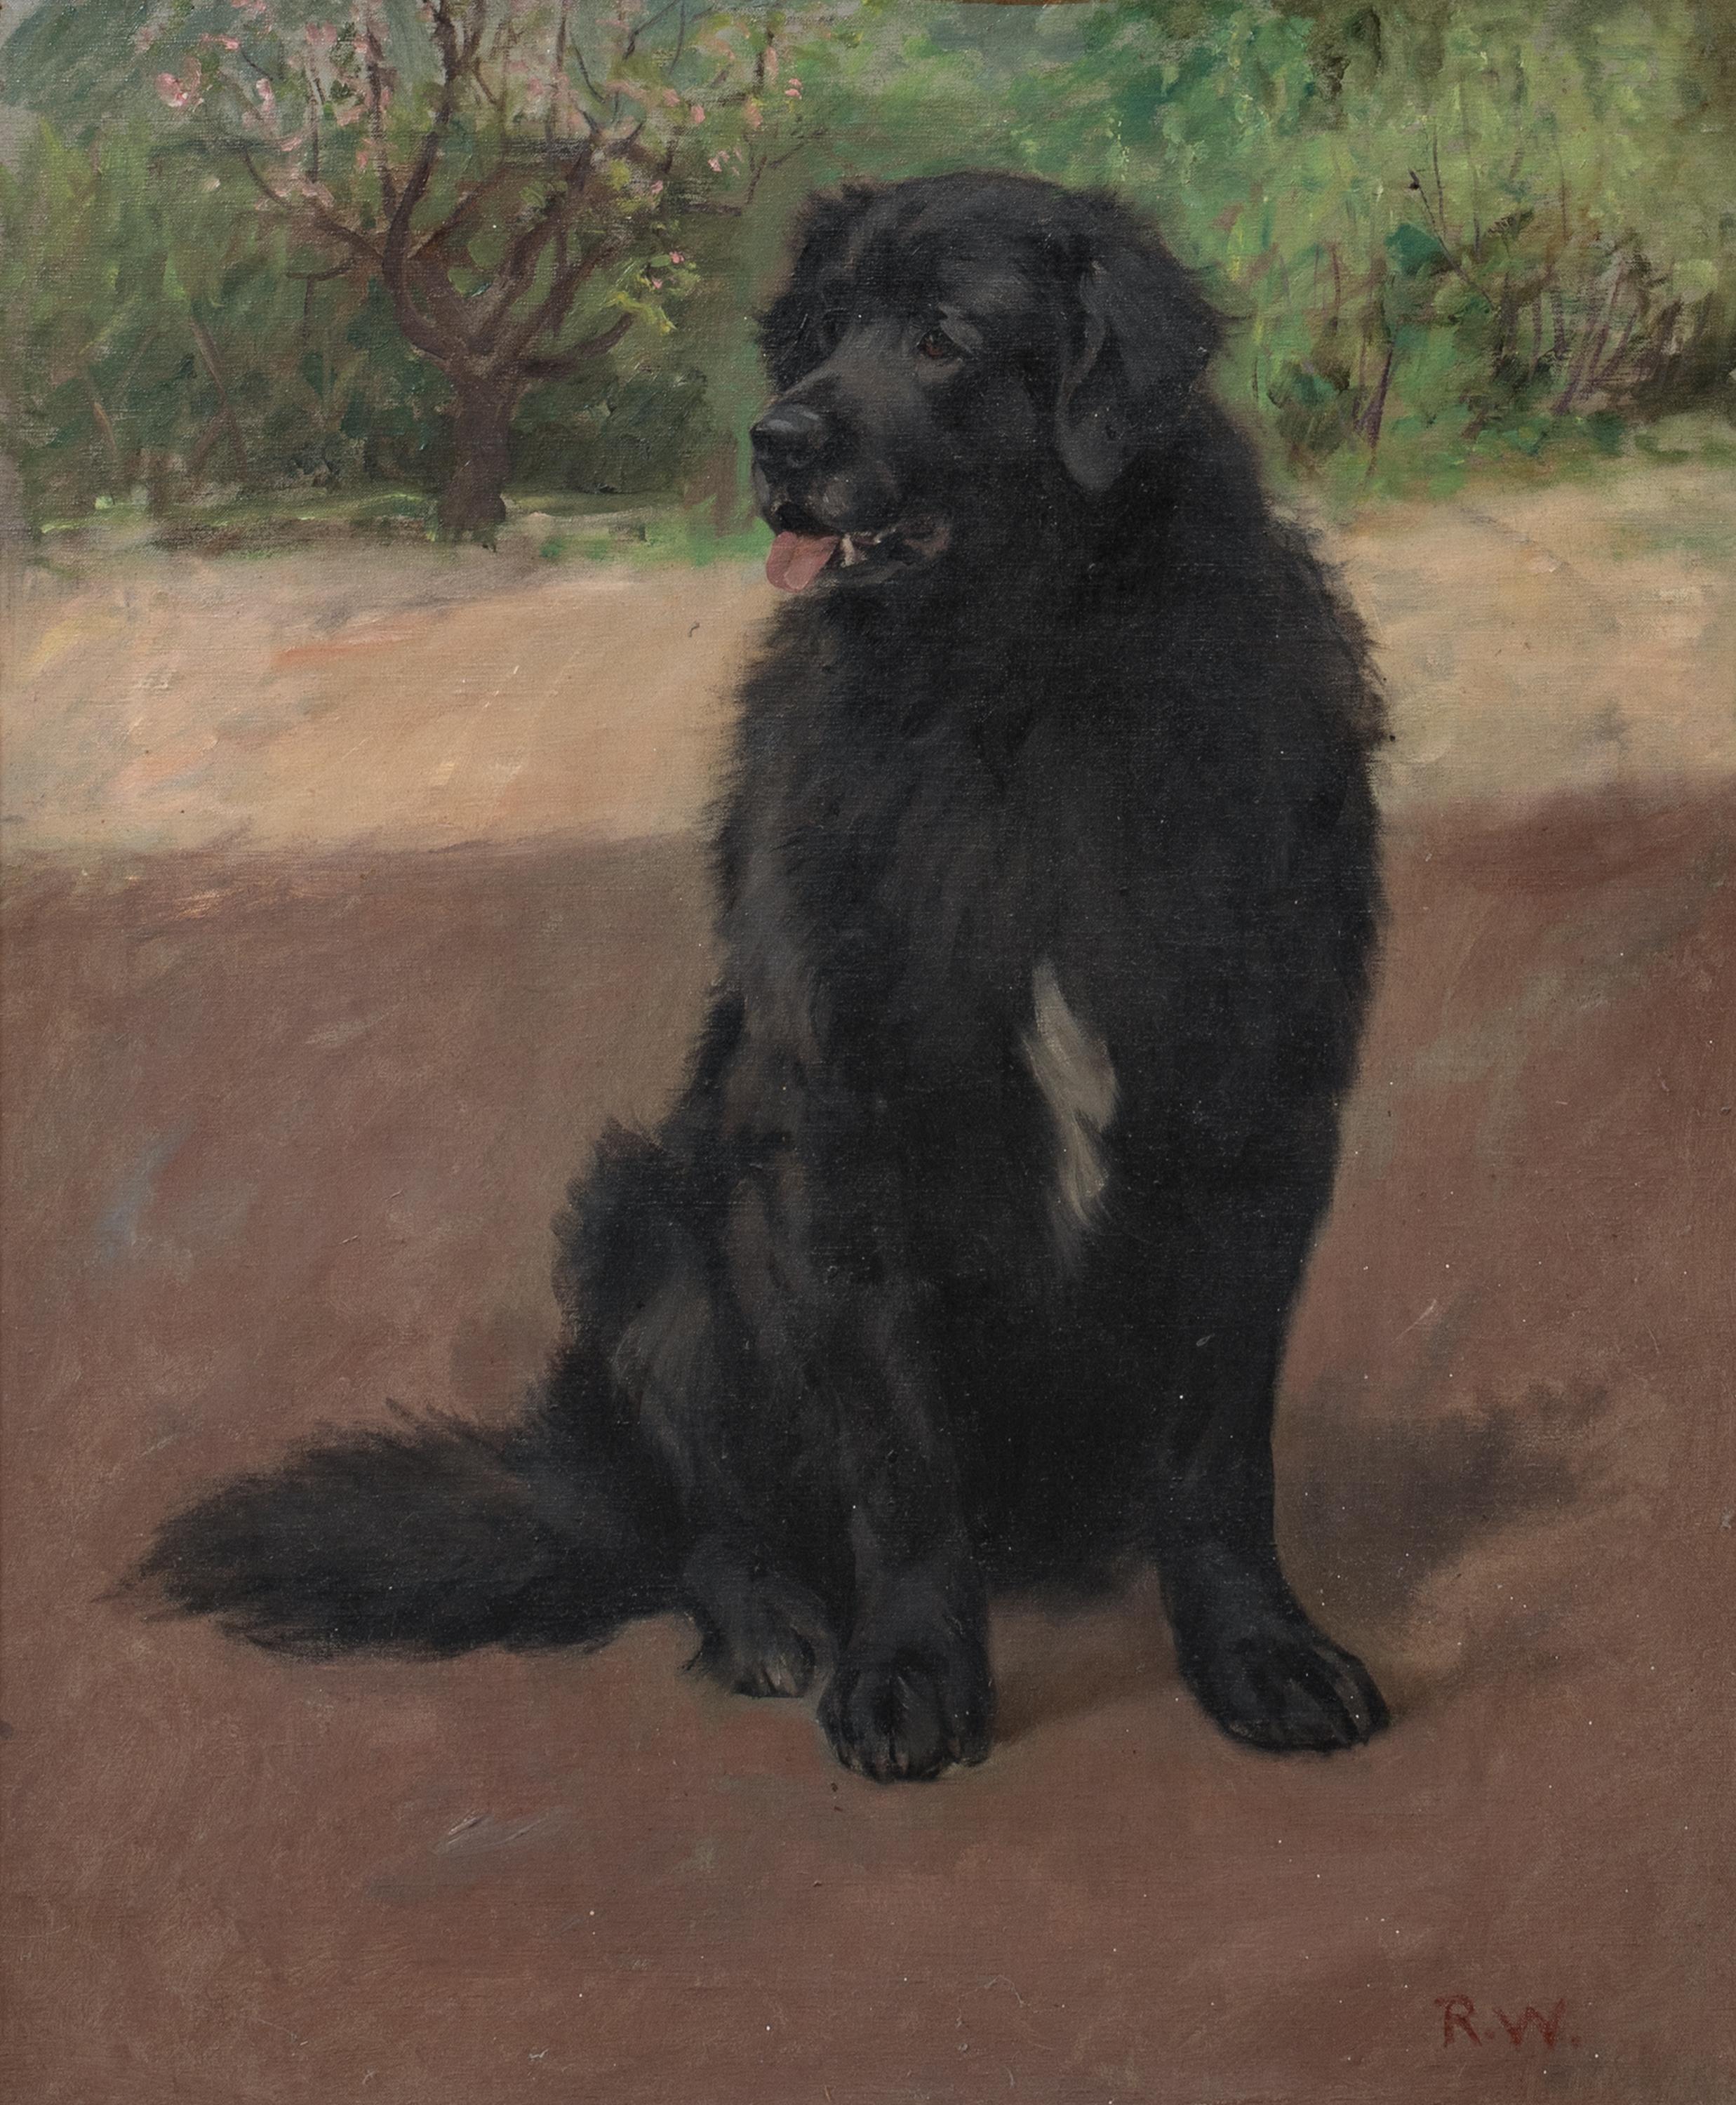 Portrait Of A Scottish Black Retriever, circa 1900

by Robert WATSON

Large 19th Century portrait of a Scottish Black Retriever, oil on canvas by Robert Watson. Important early depiction of the breed and descendent of the original black retrievers